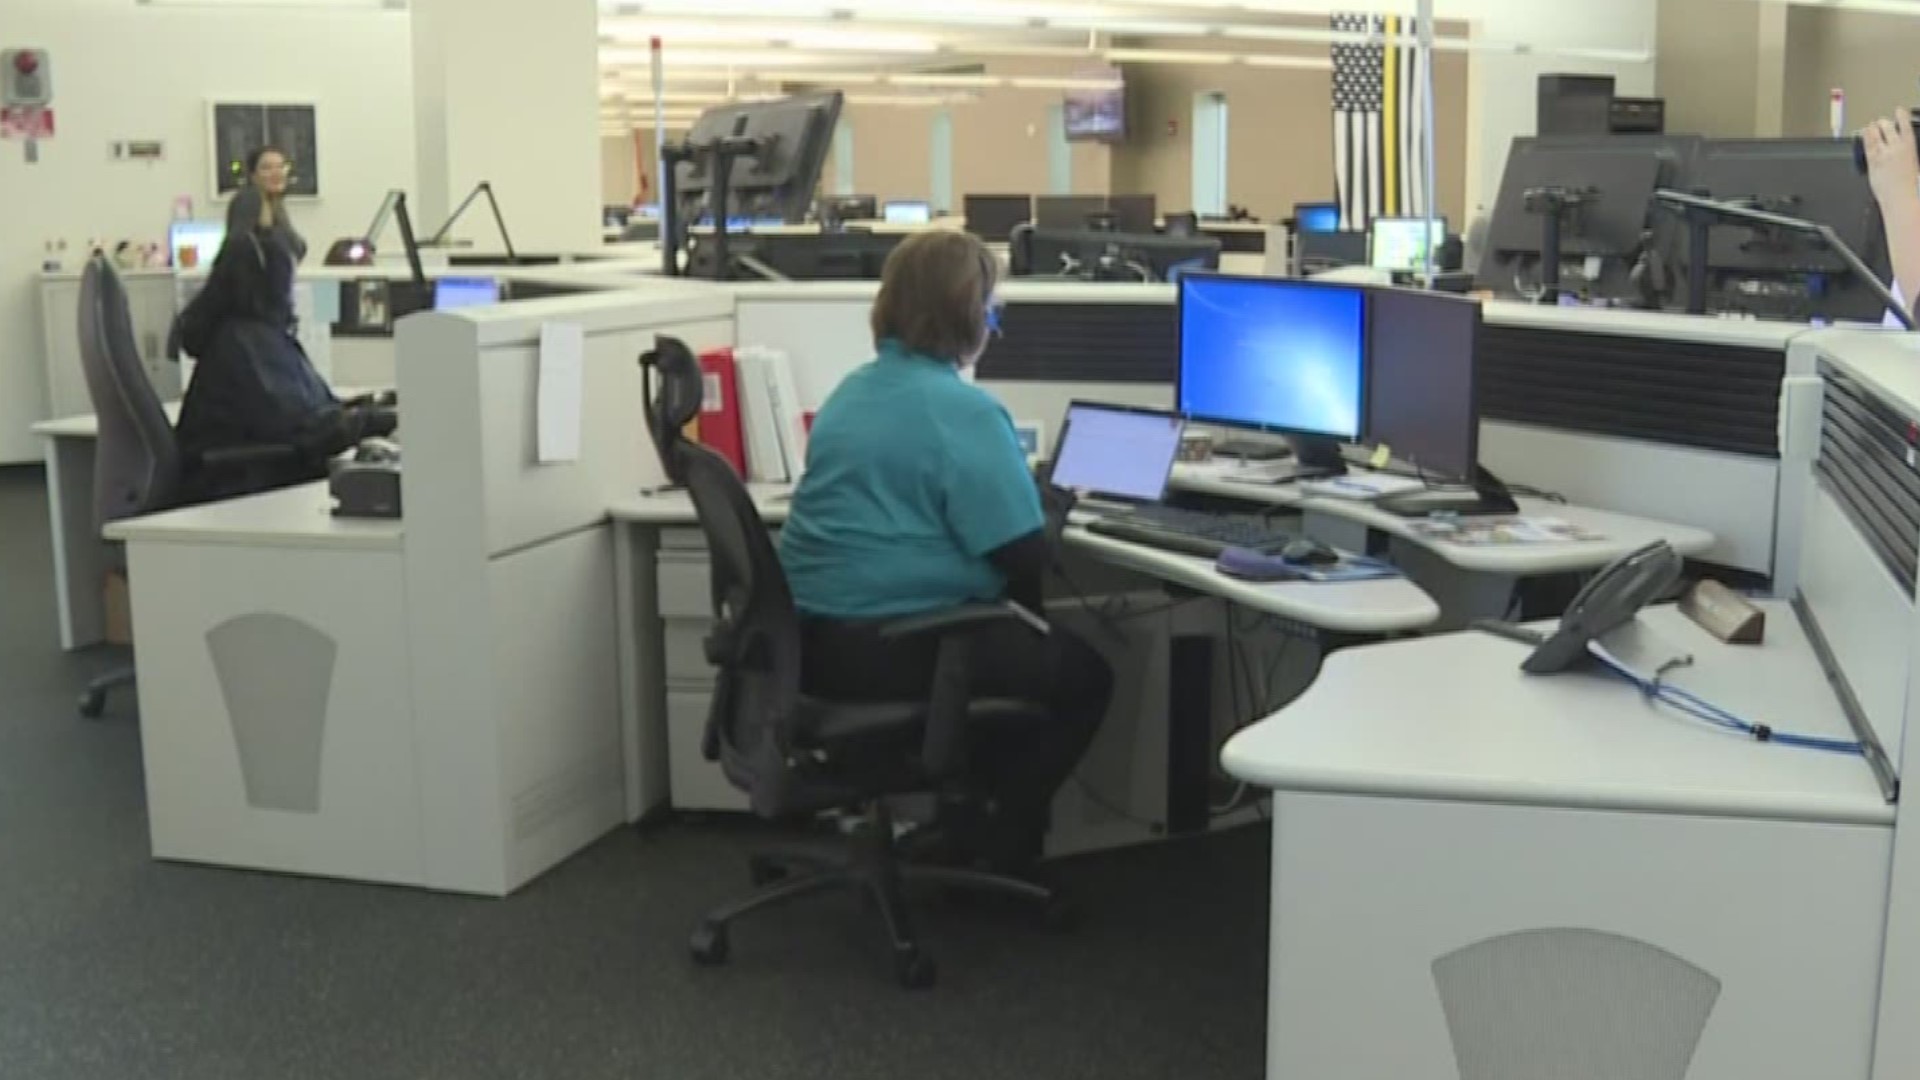 There's going to be a new number to call to get all the information you need in Manatee County.